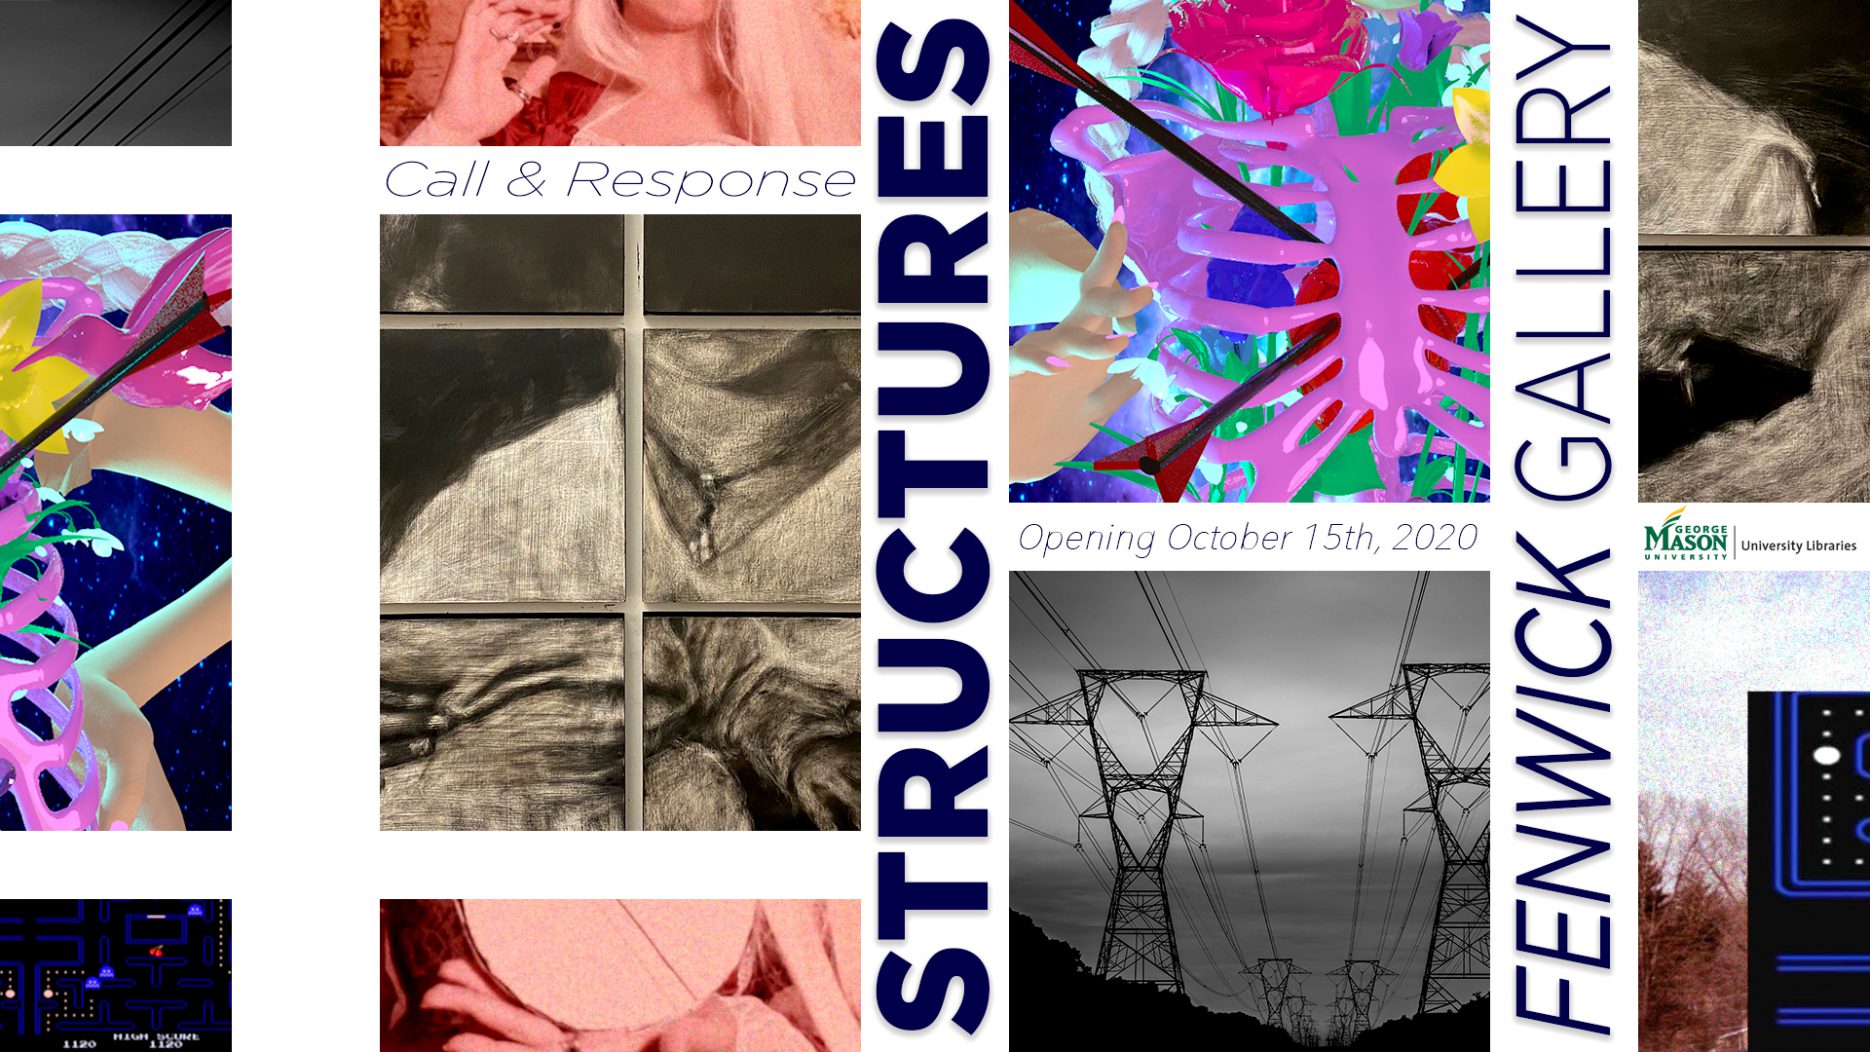 Exhibition announcement for Call & Response: Structures. Includes detail images of works of art included in the exhibit.